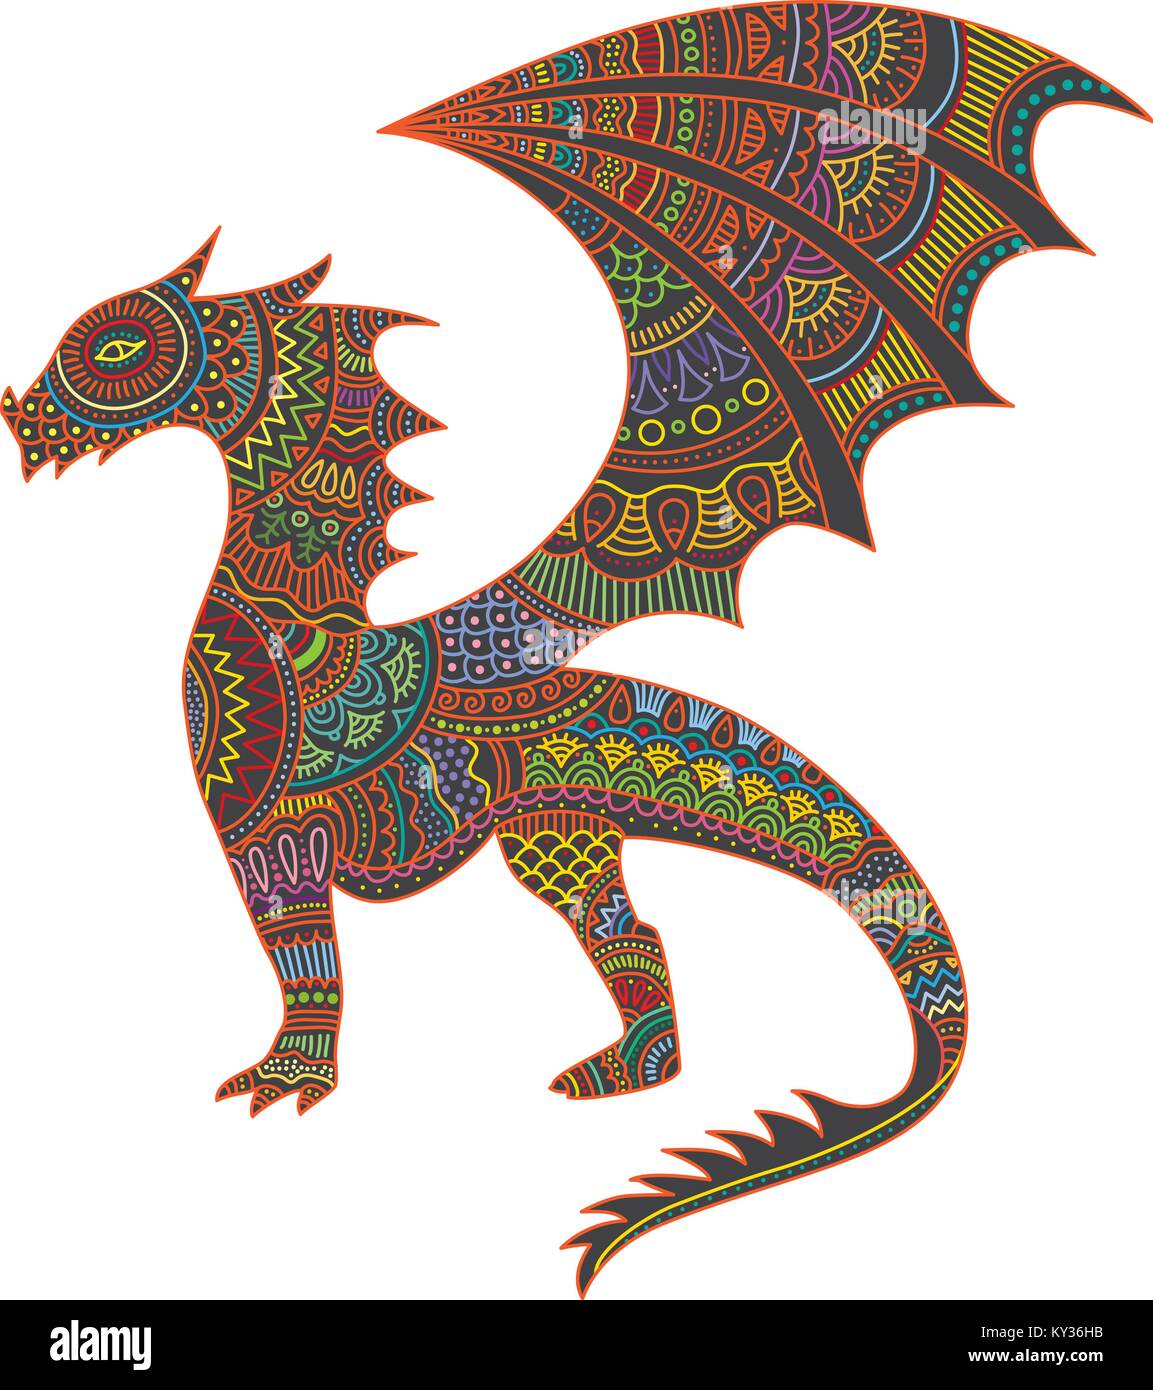 Mystical creatures dragon vector illustration with colorful el alebrije Mexican style pattern Stock Vector